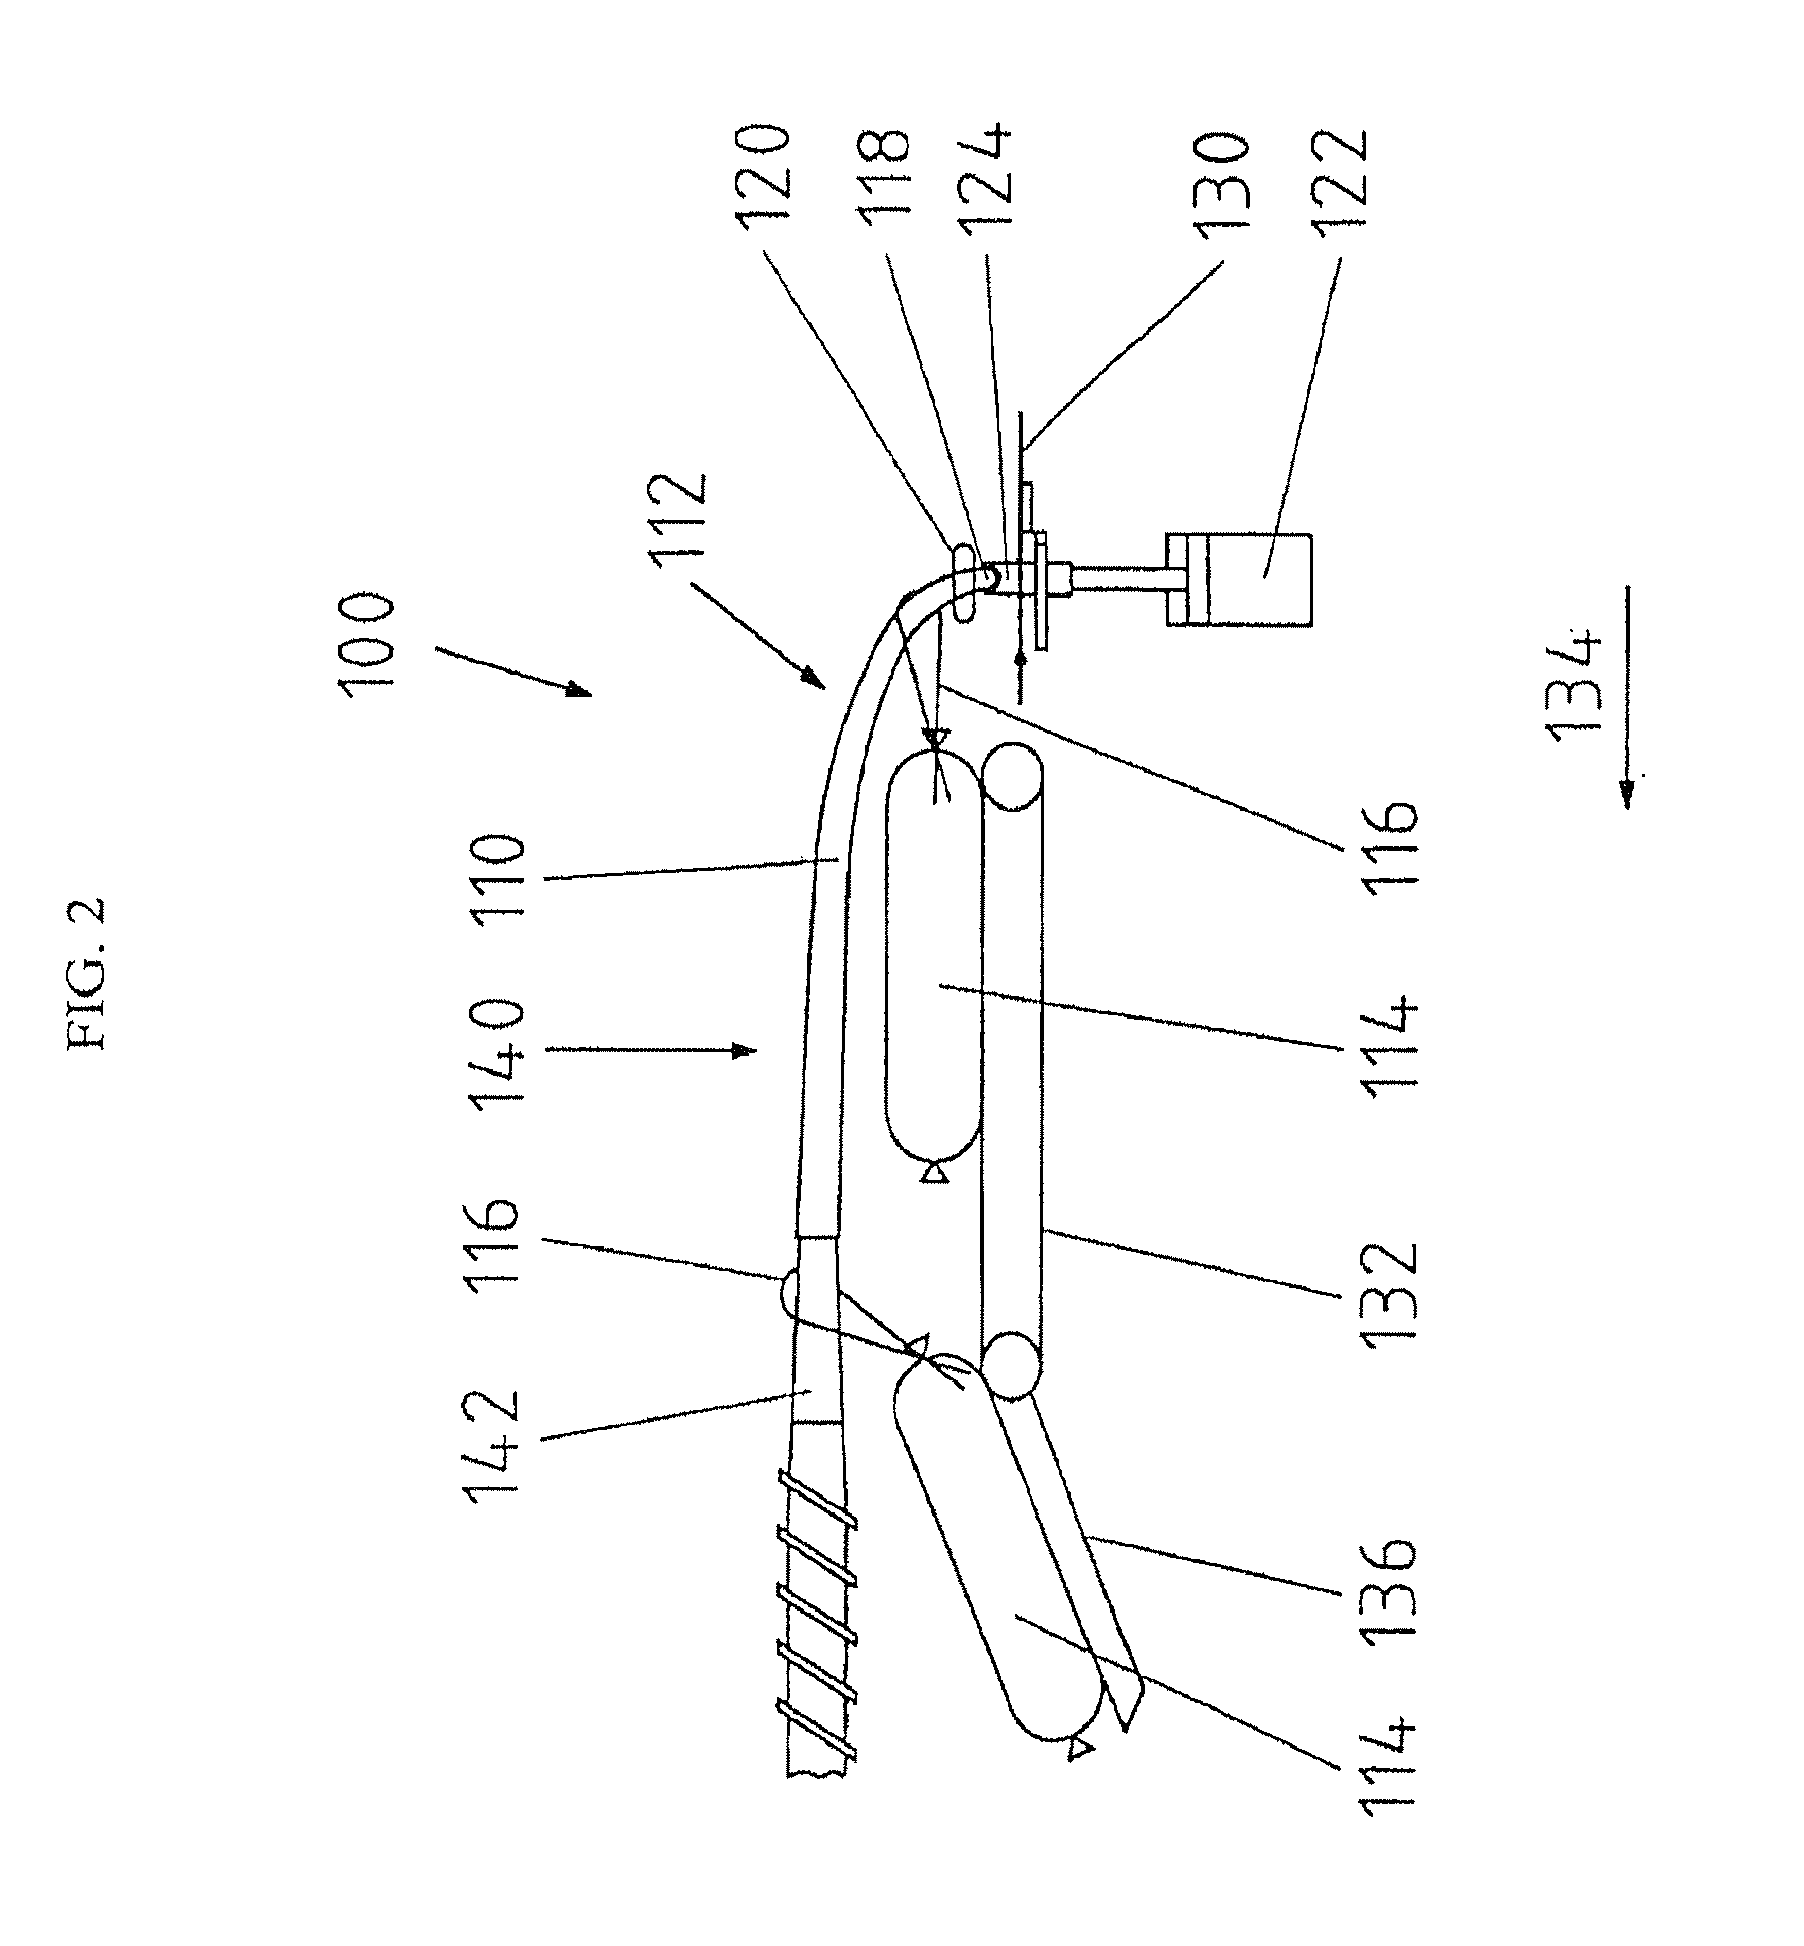 Apparatus for picking up and guiding loops